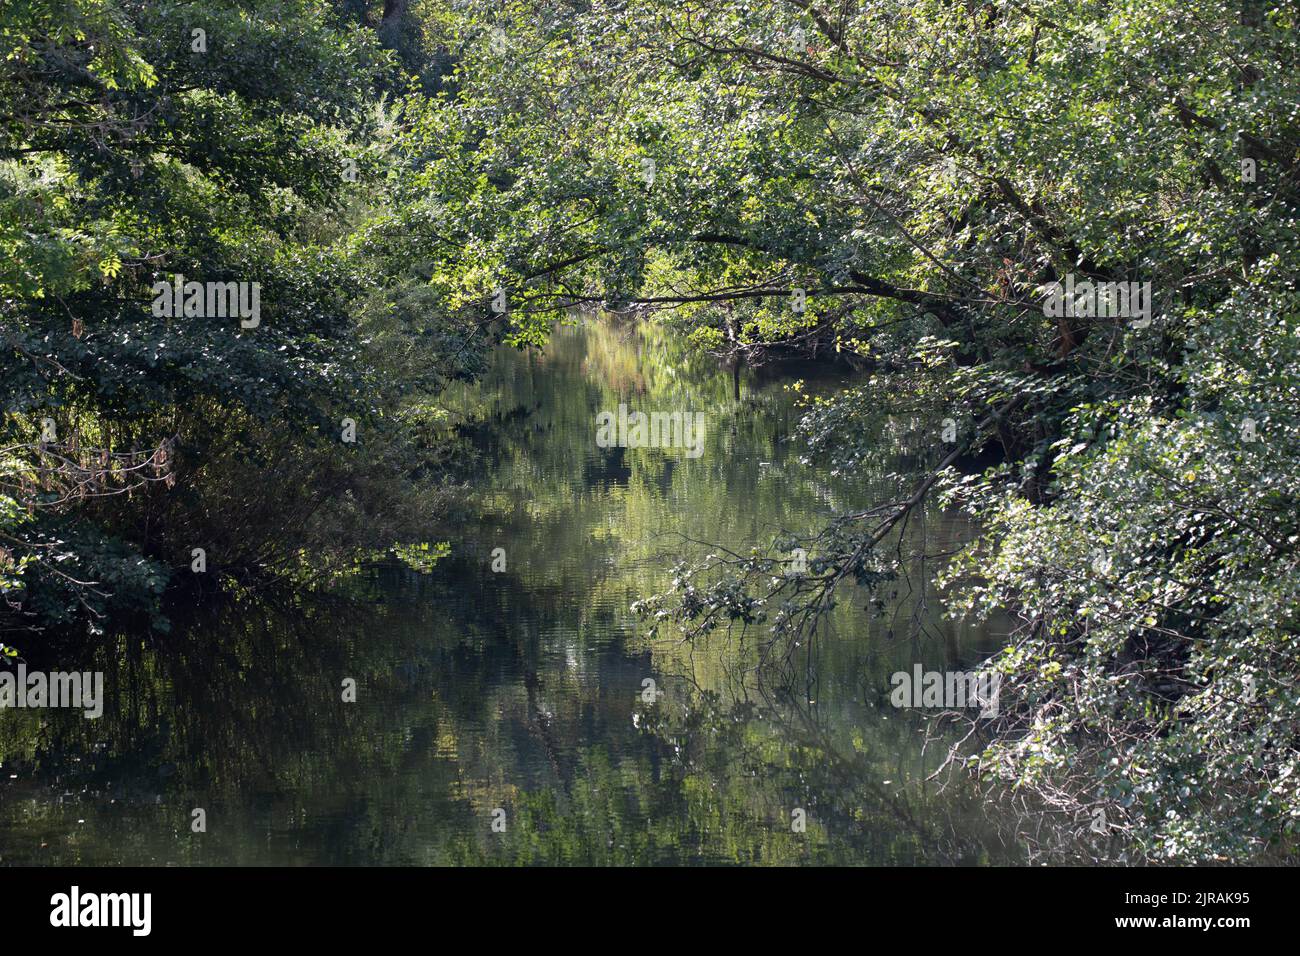 River course overgrown with trees and bushes Stock Photo